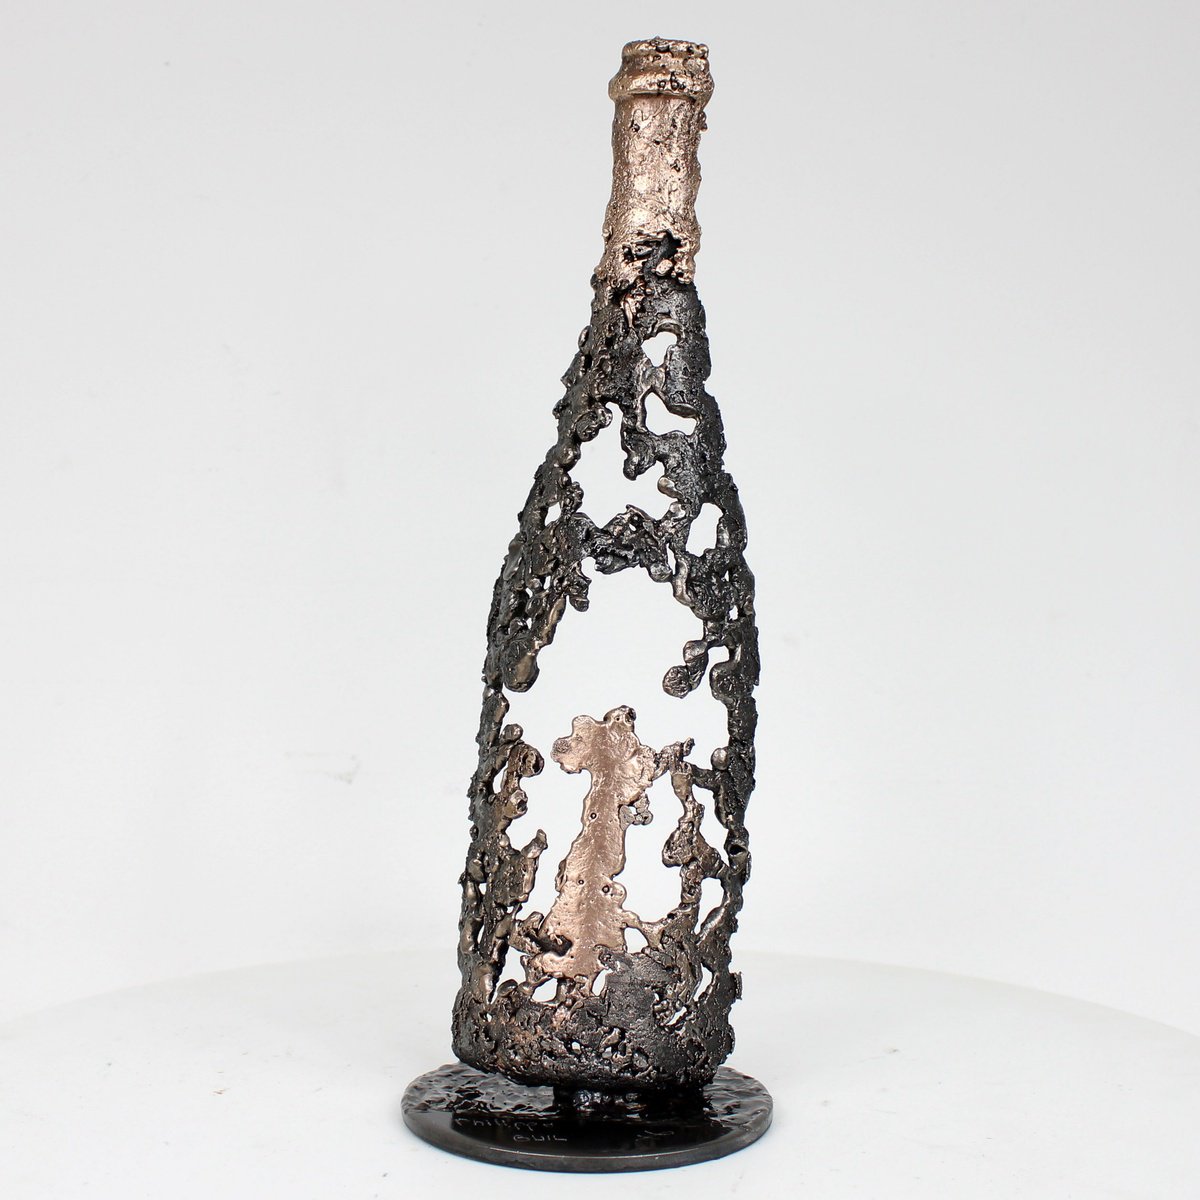 Champagne bottle 56-23 by Philippe Buil